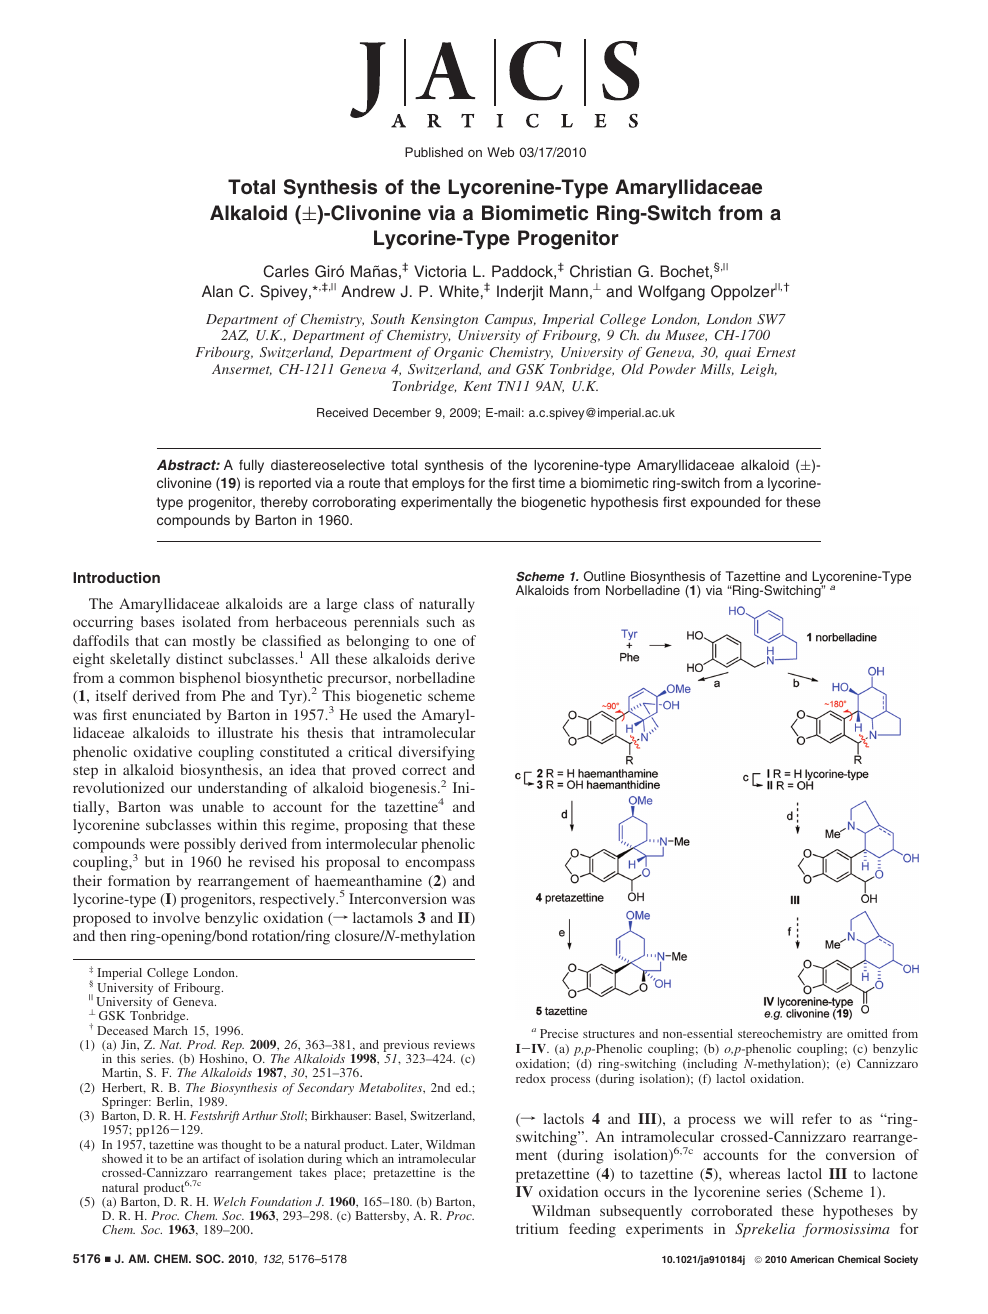 Total Synthesis Of The Lycorenine Type Amaryllidaceae Alkaloid Clivonine Via A Biomimetic Ring Switch From A Lycorine Type Progenitor Topic Of Research Paper In Chemical Sciences Download Scholarly Article Pdf And Read For Free